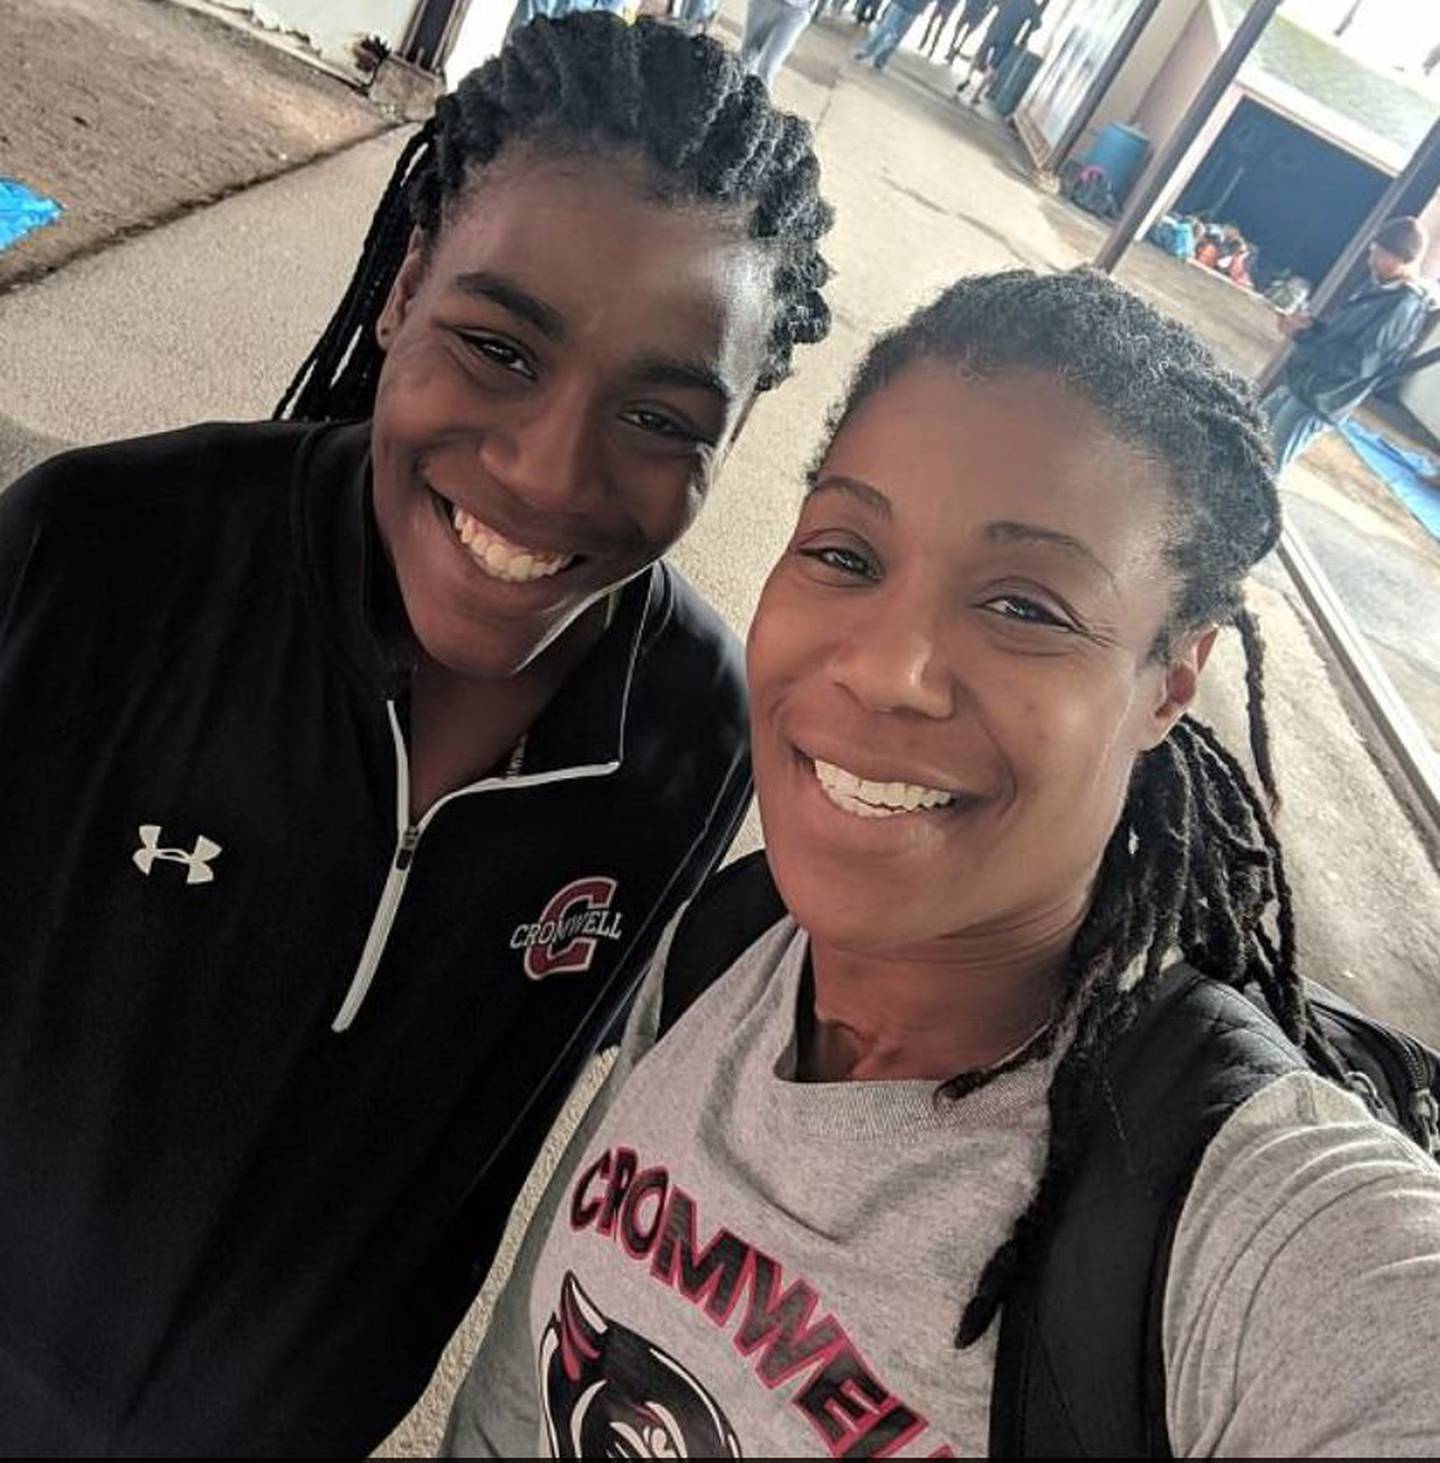 Andraya Yearwood, pictured on the left with her mother, came in first place in the 100-meter dash during last year's competition. Photo / Facebook

